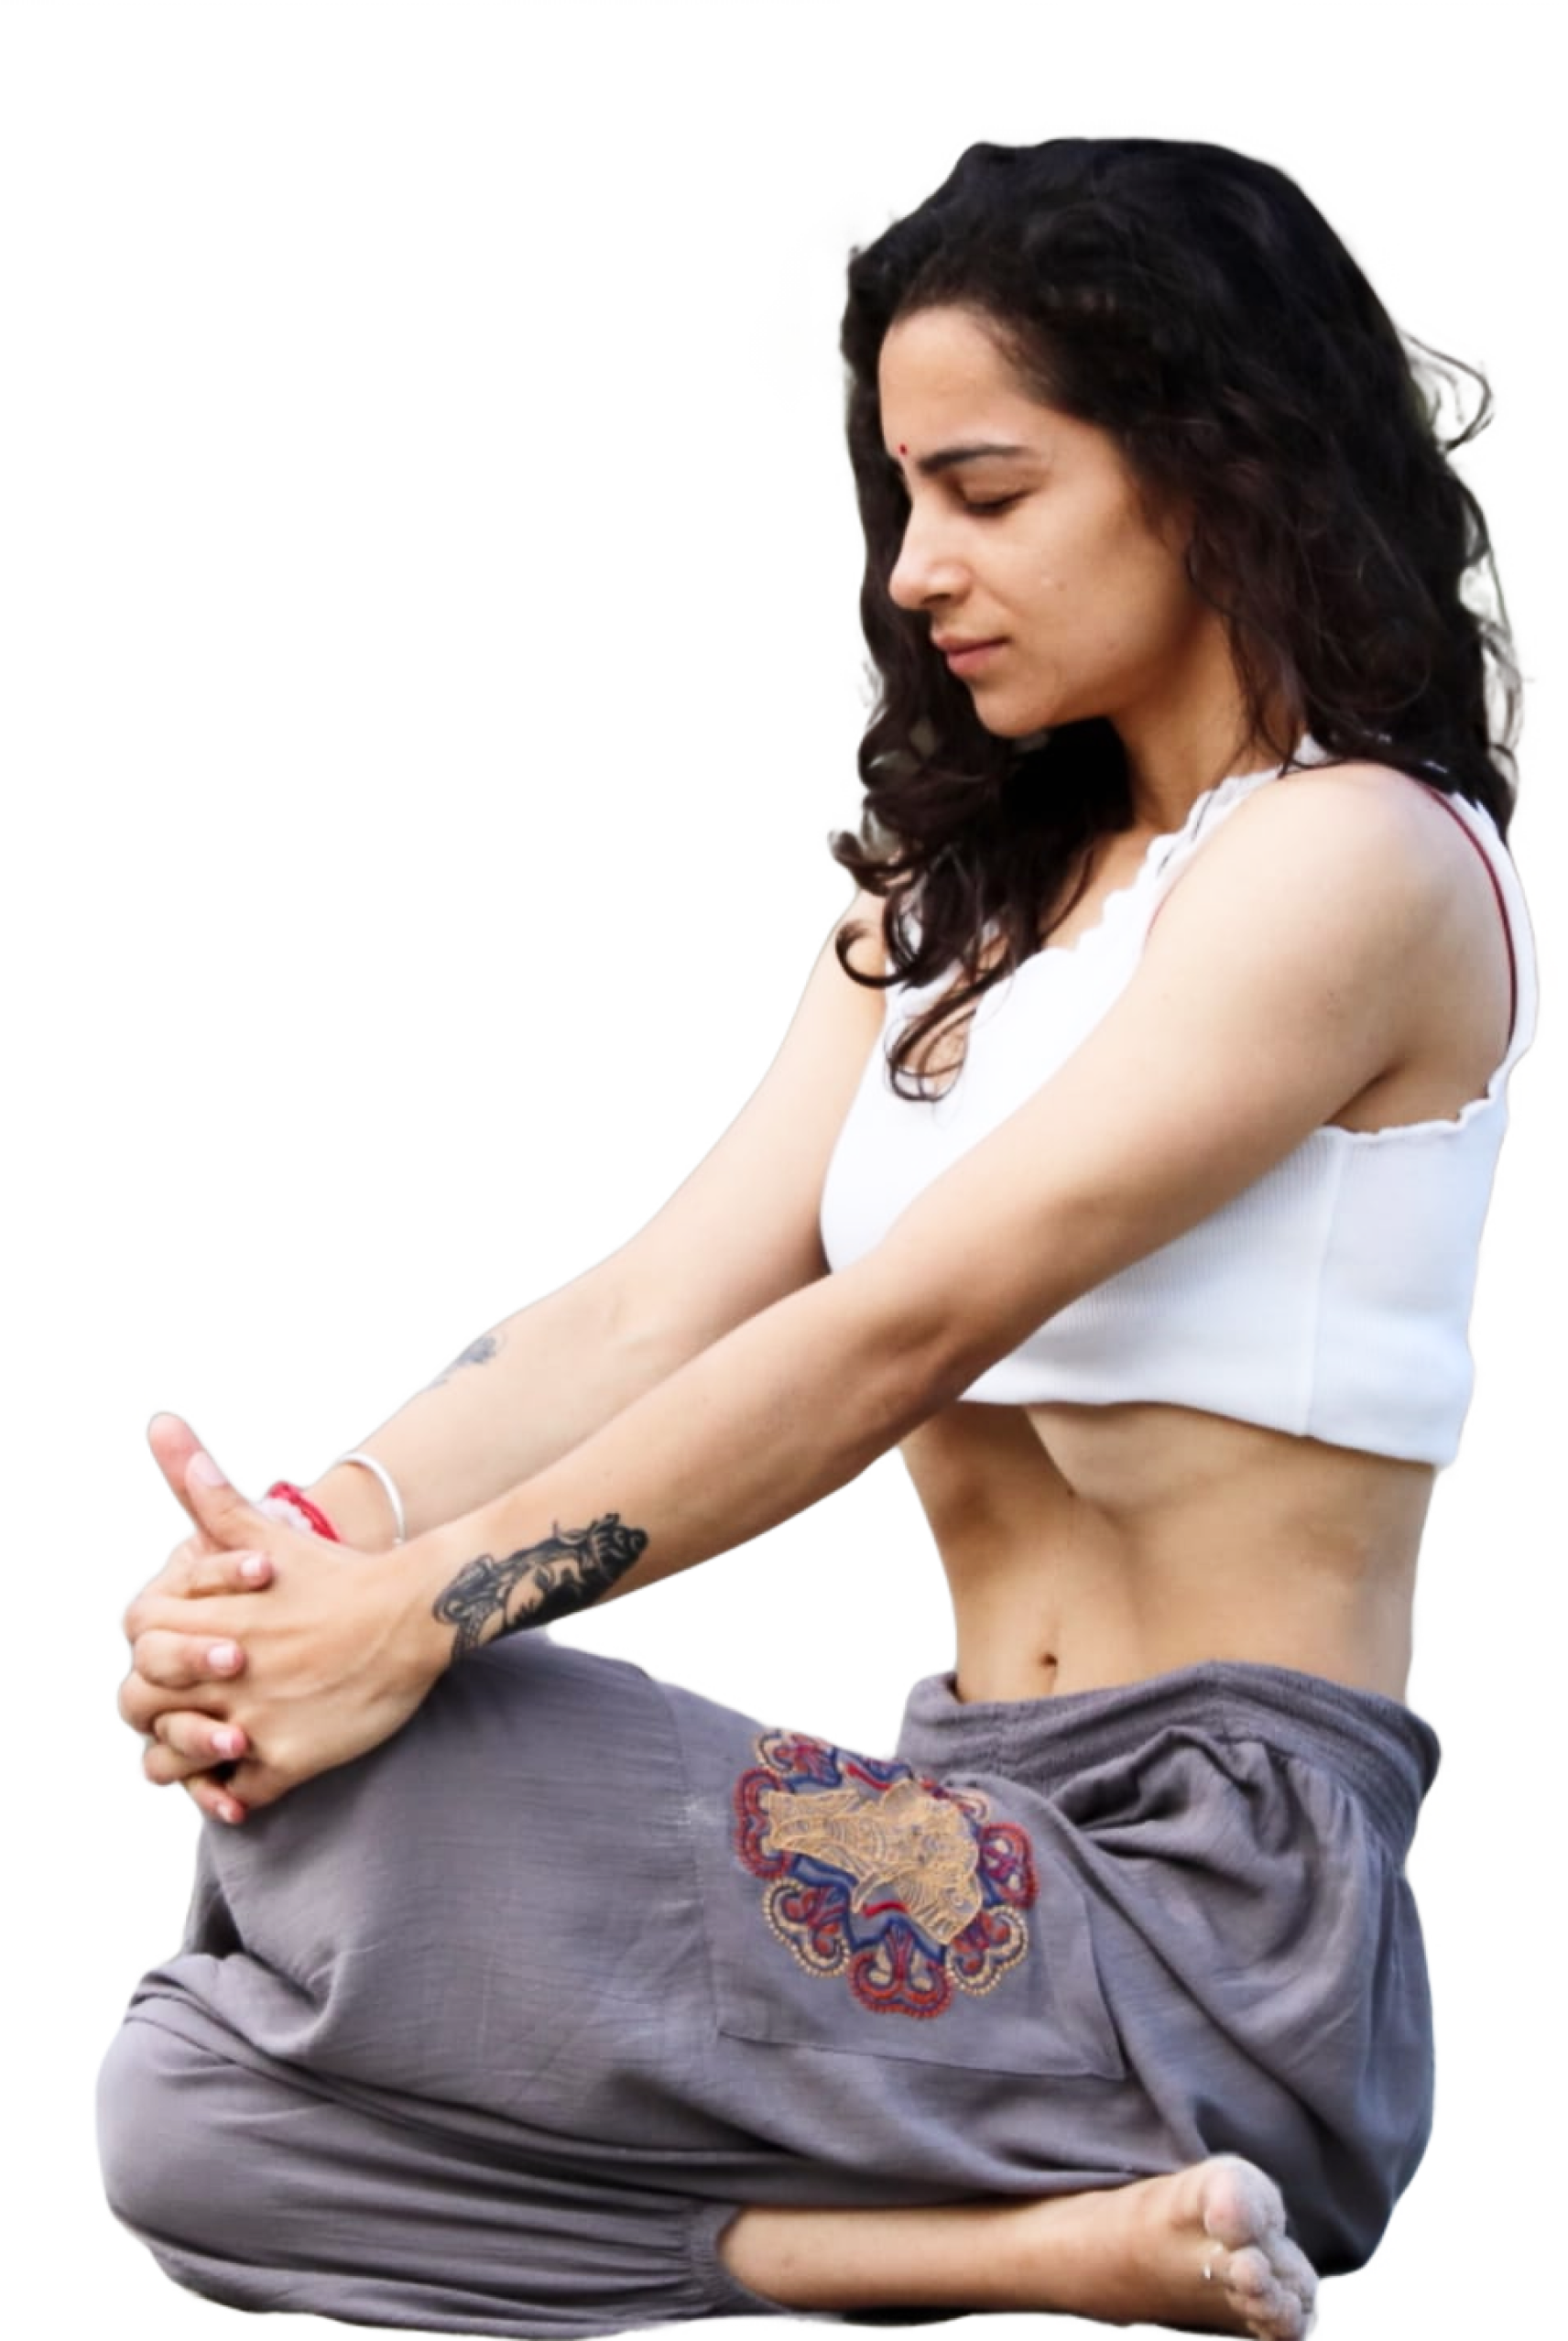 Greesha Dhingra  COTTON CLOTHES ARE BEST SUITED FOR YOGA PRACTICE